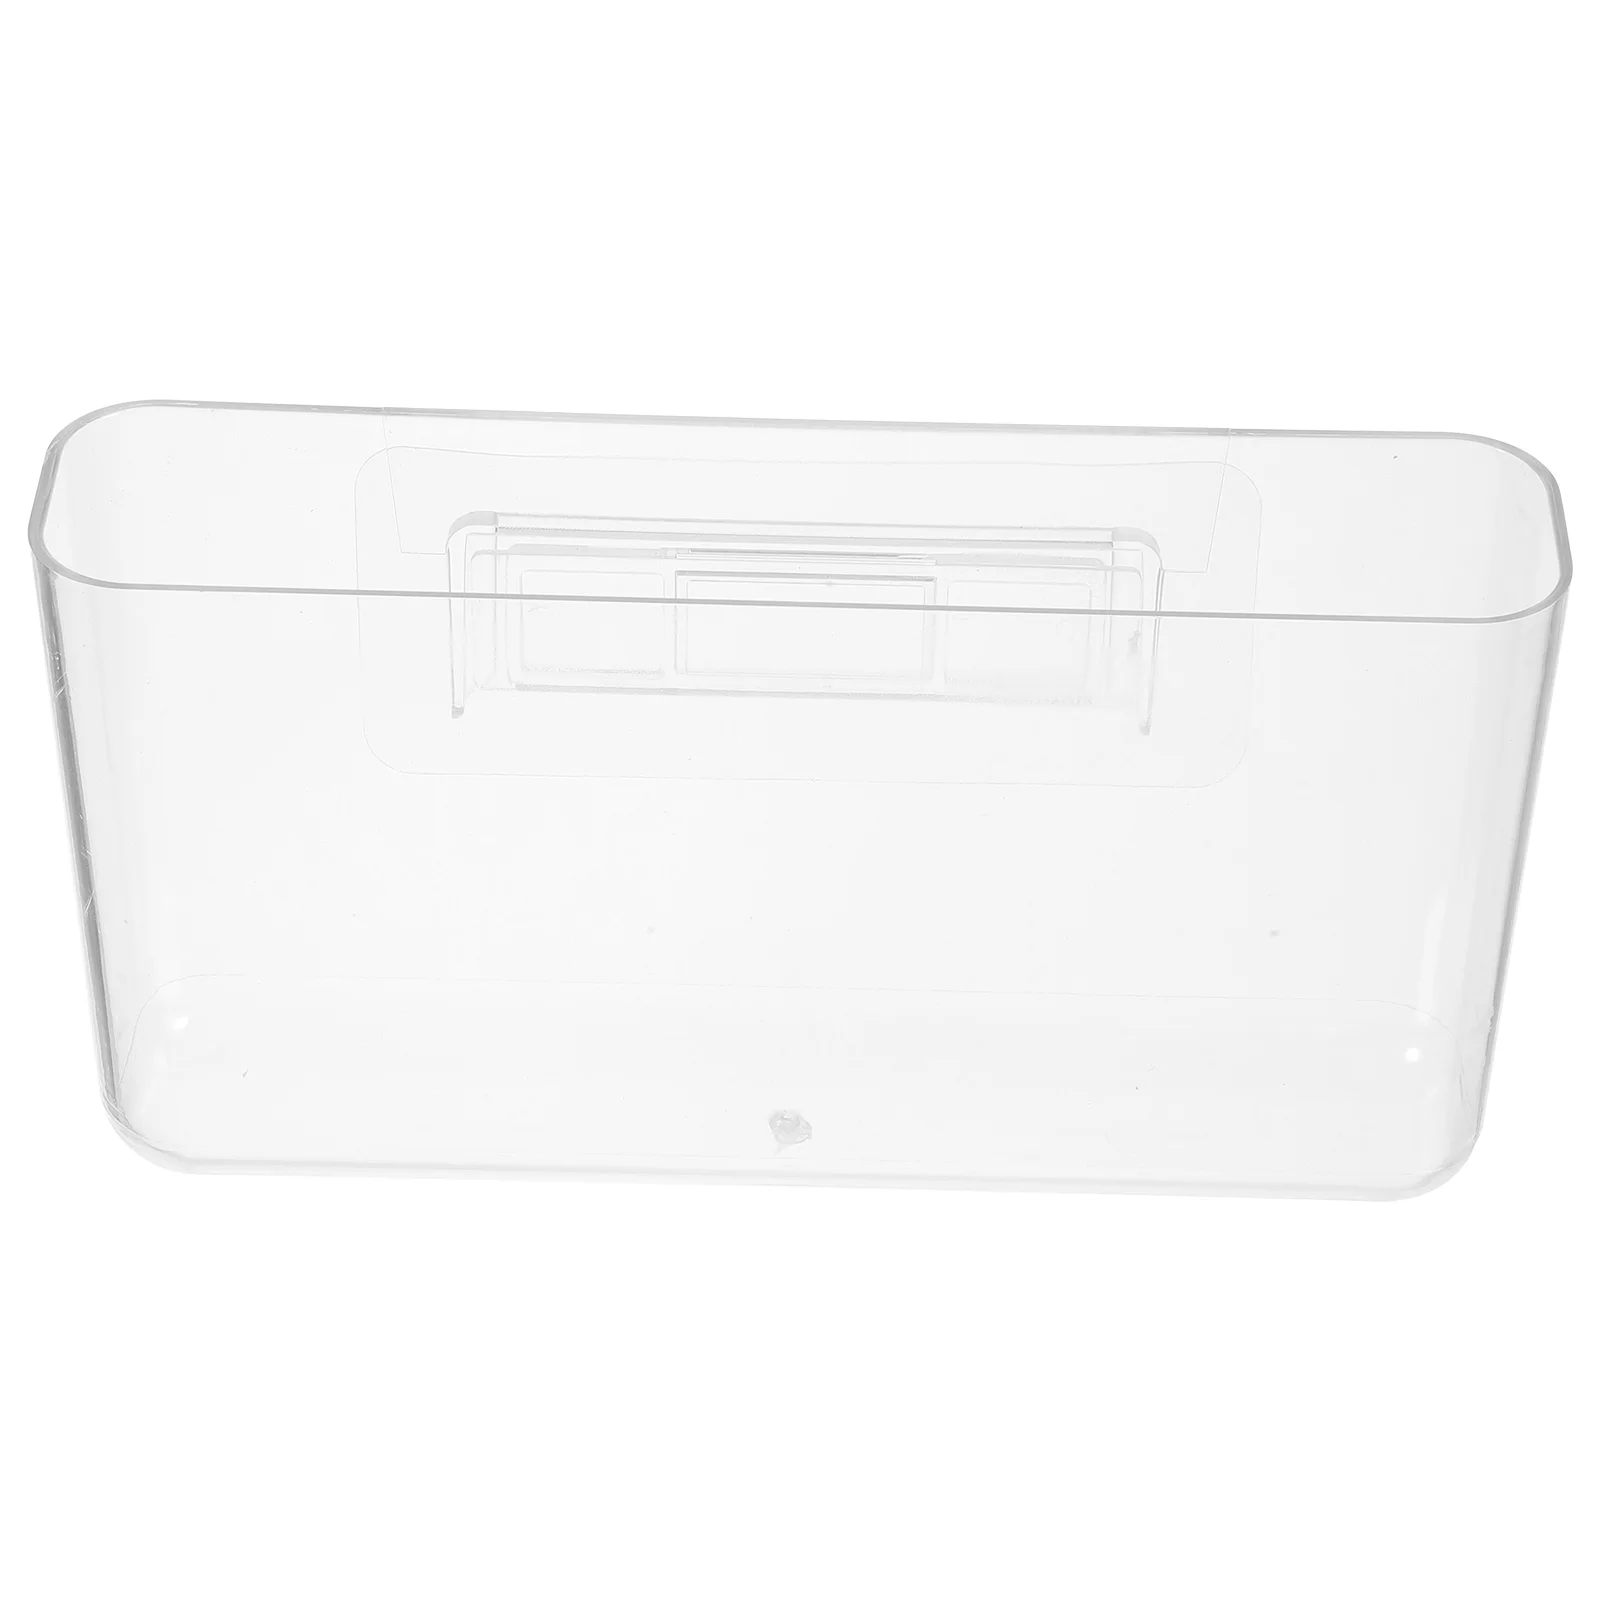 

Wall Mounted Marker Holder and Organizer for Whiteboard, Fridge, Locker, and Table